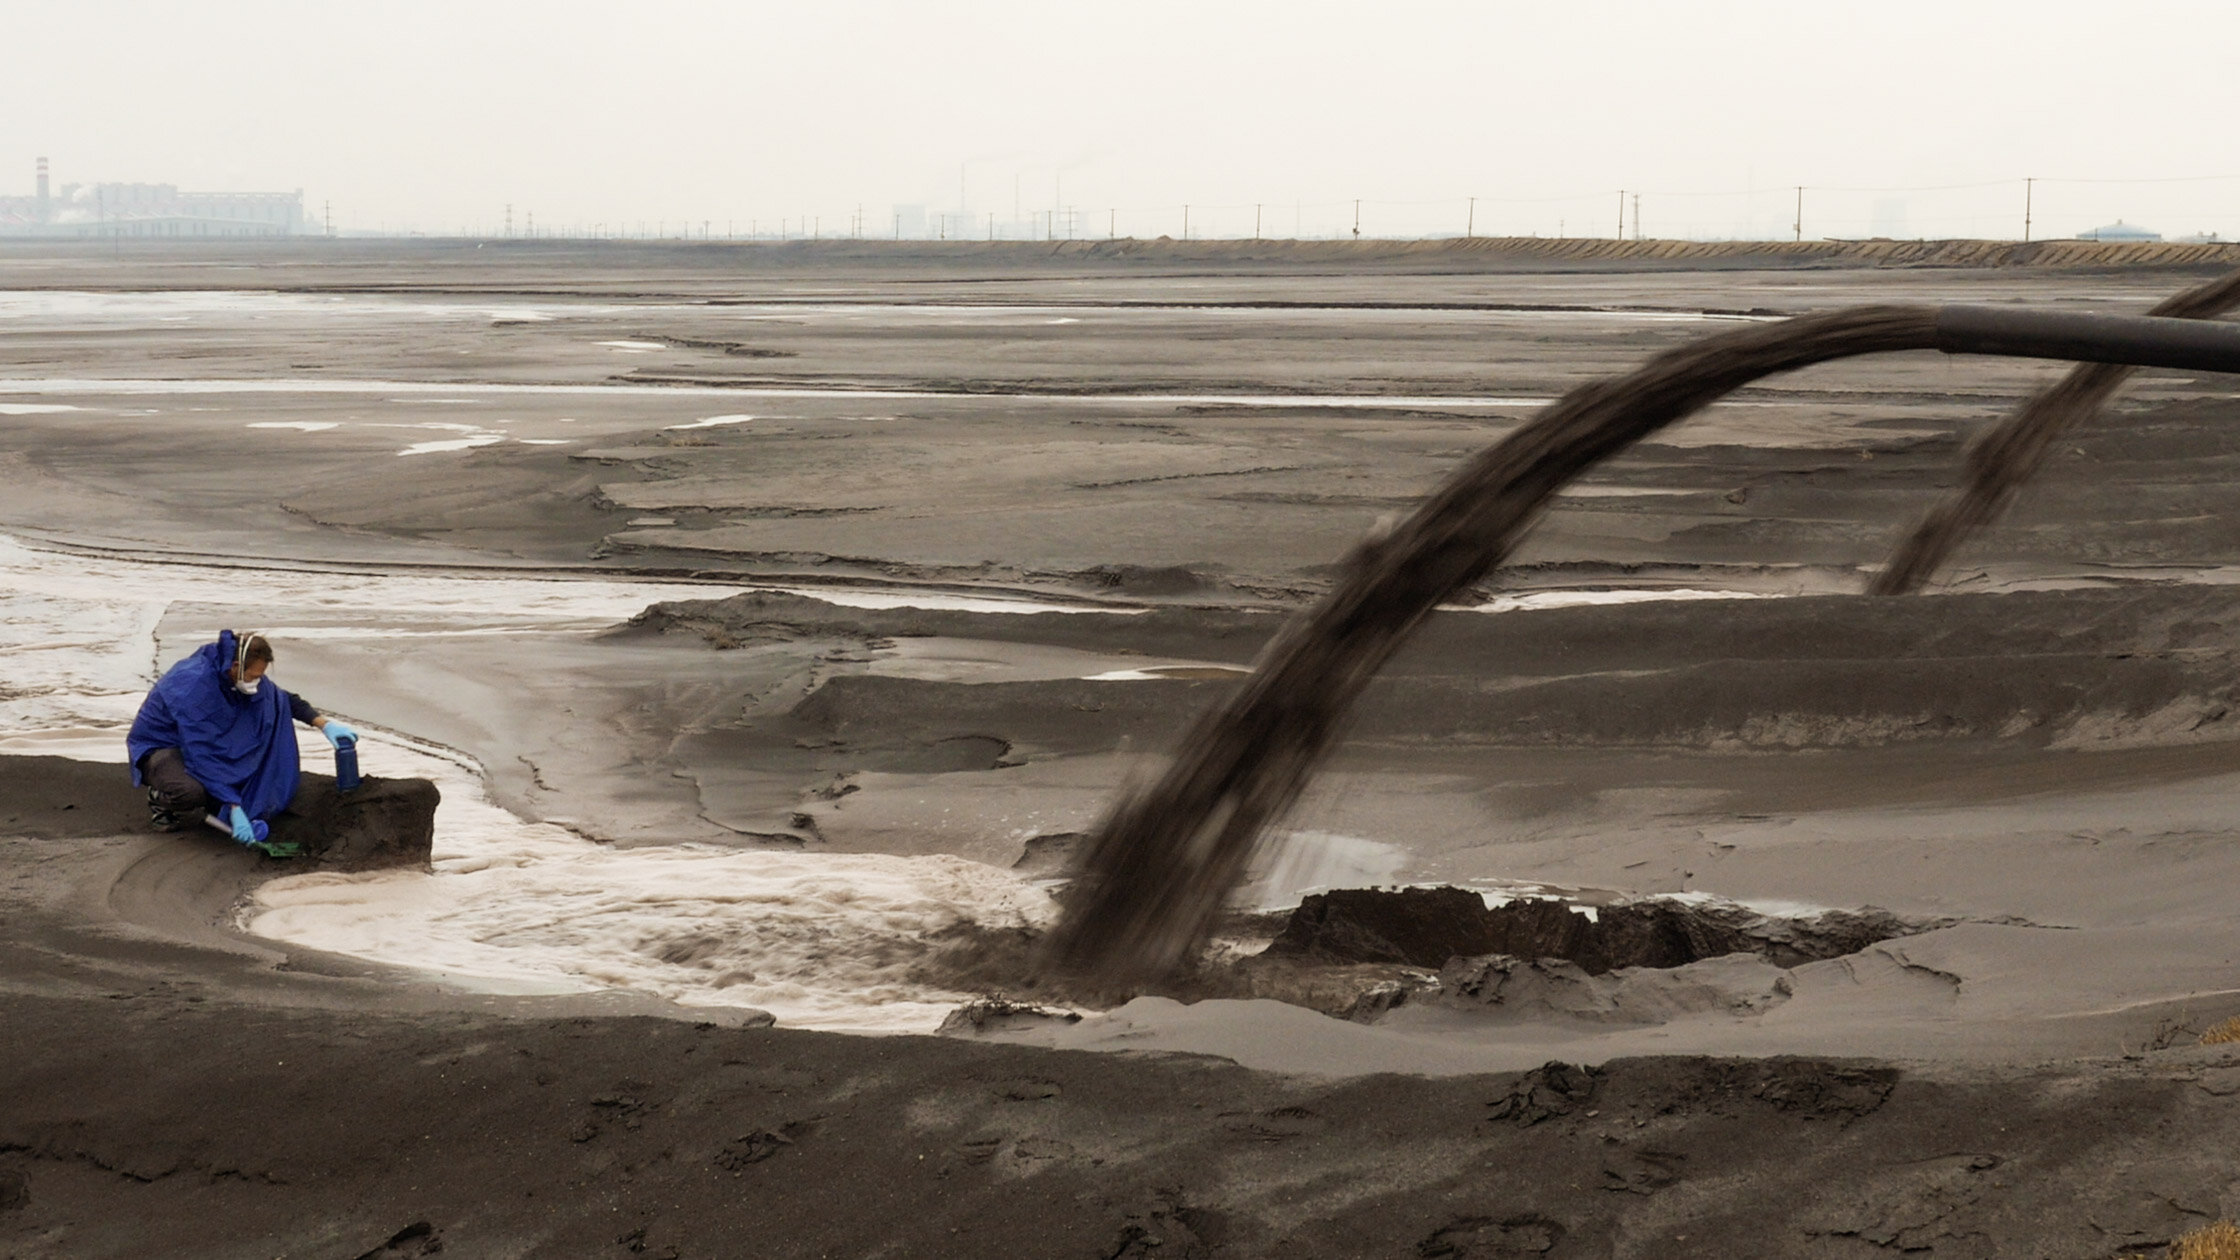   Still from Unknown Fields Division´s film Rare Earthenware. The still shows Liam Young, from Unknown Fields, collecting radioactive mud from the tailings lake at the outflow of Baogang Iron and Steel Corporation. Photo: Toby Smith  